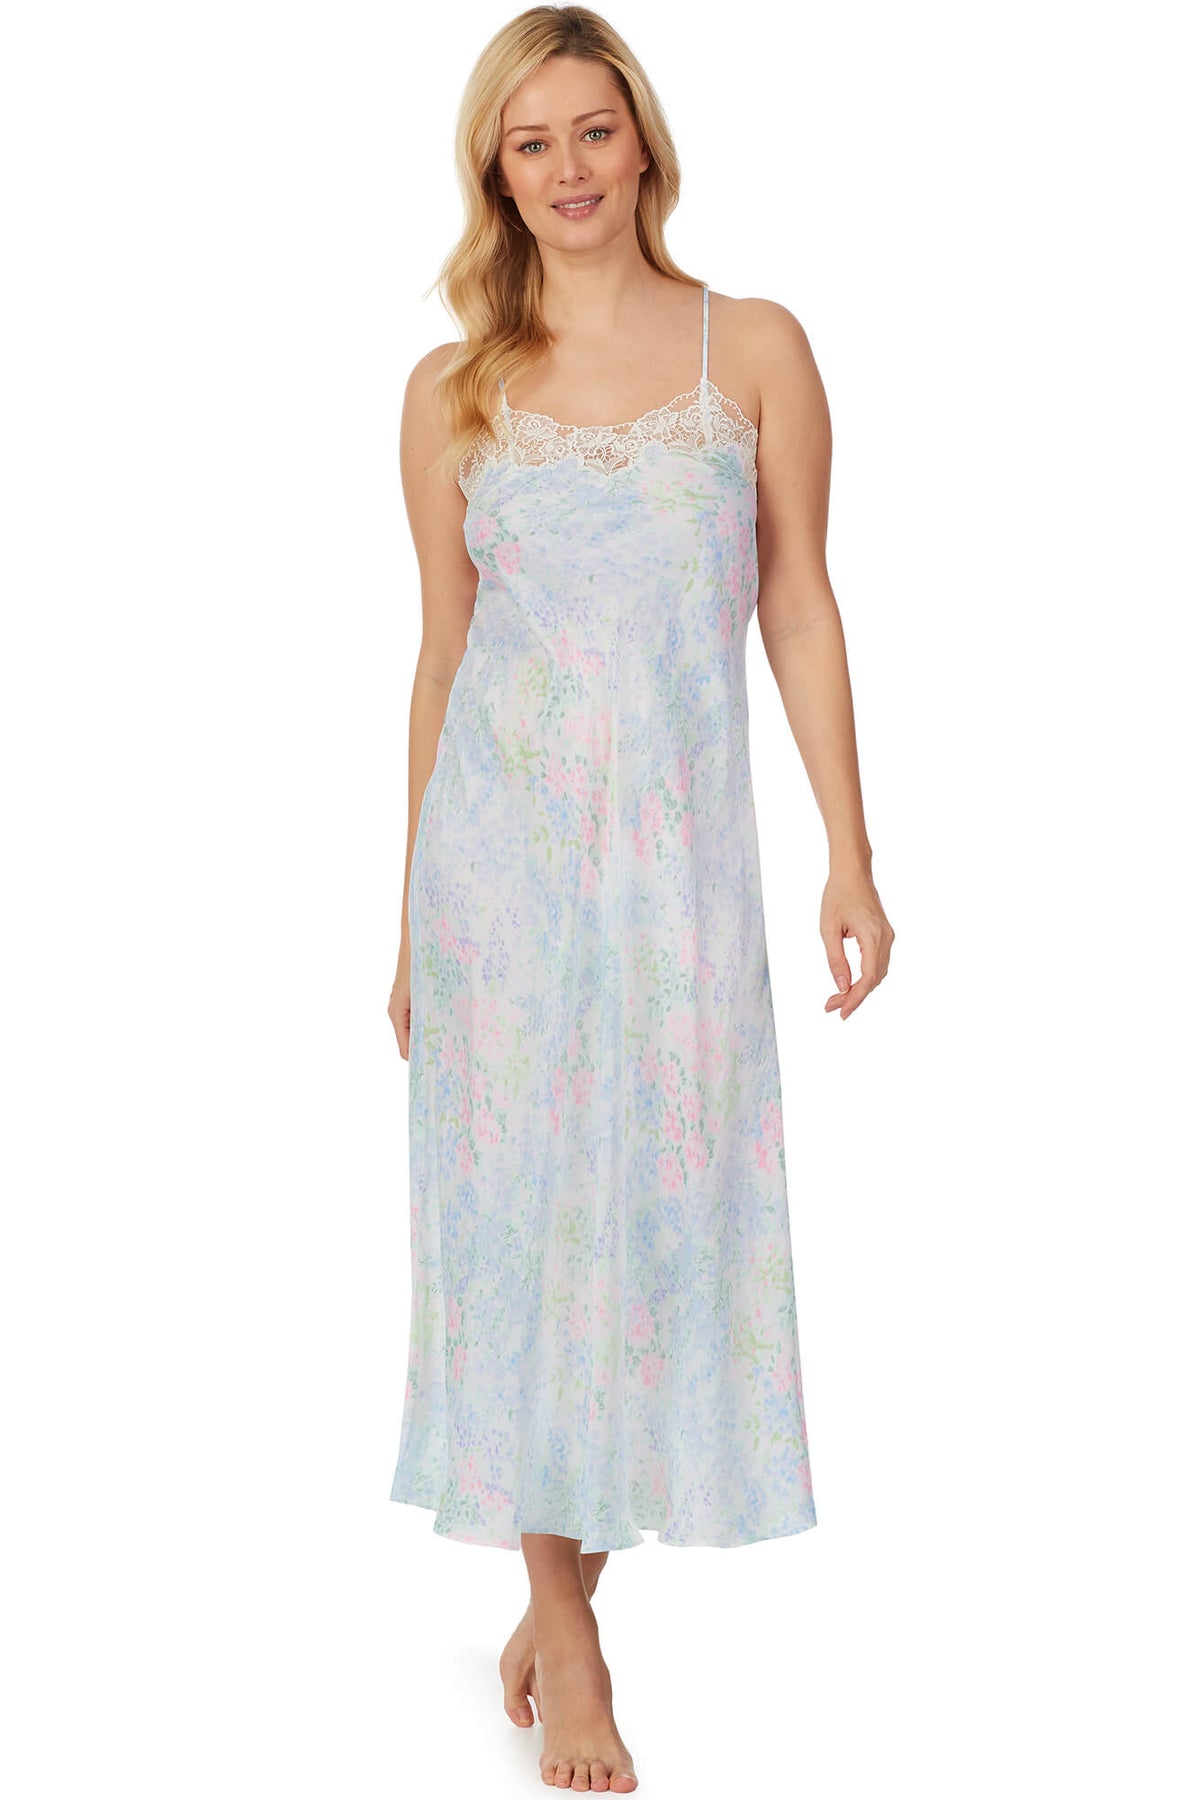 A lady wearing a watercolor floral sleeveless satin gown